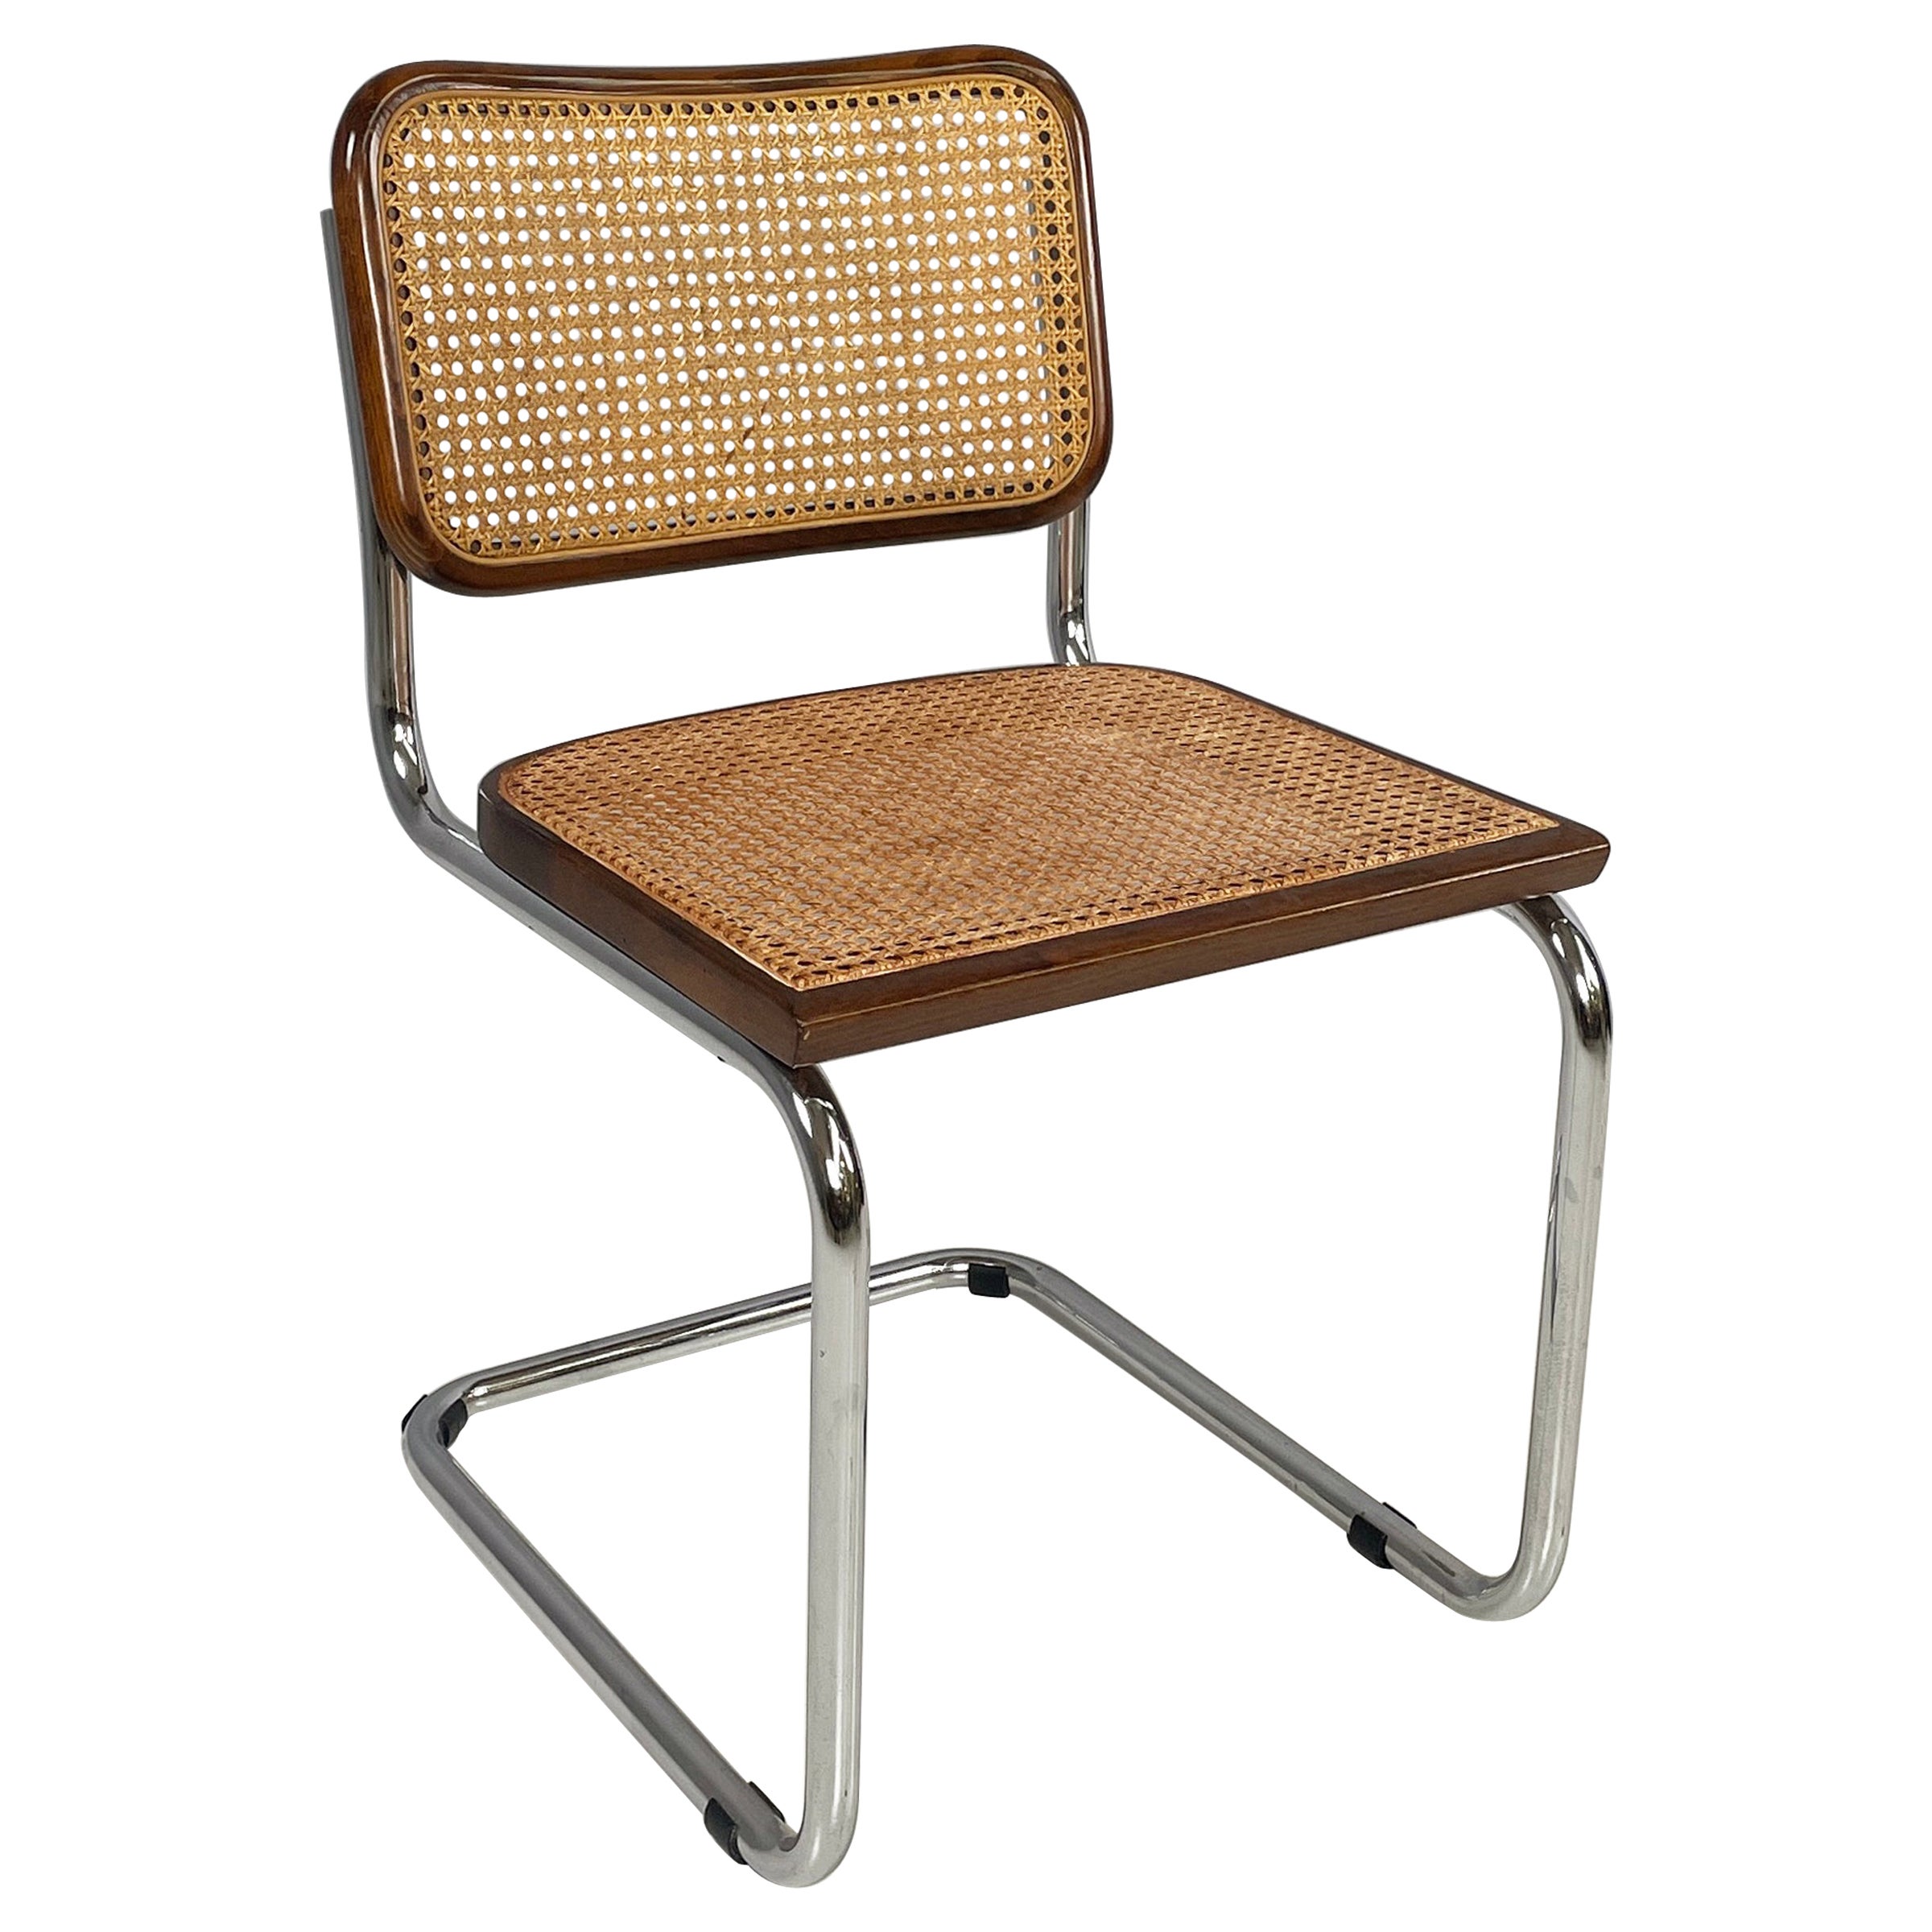 Italian mid-century modern Chair in straw, wood and steel, 1960s For Sale